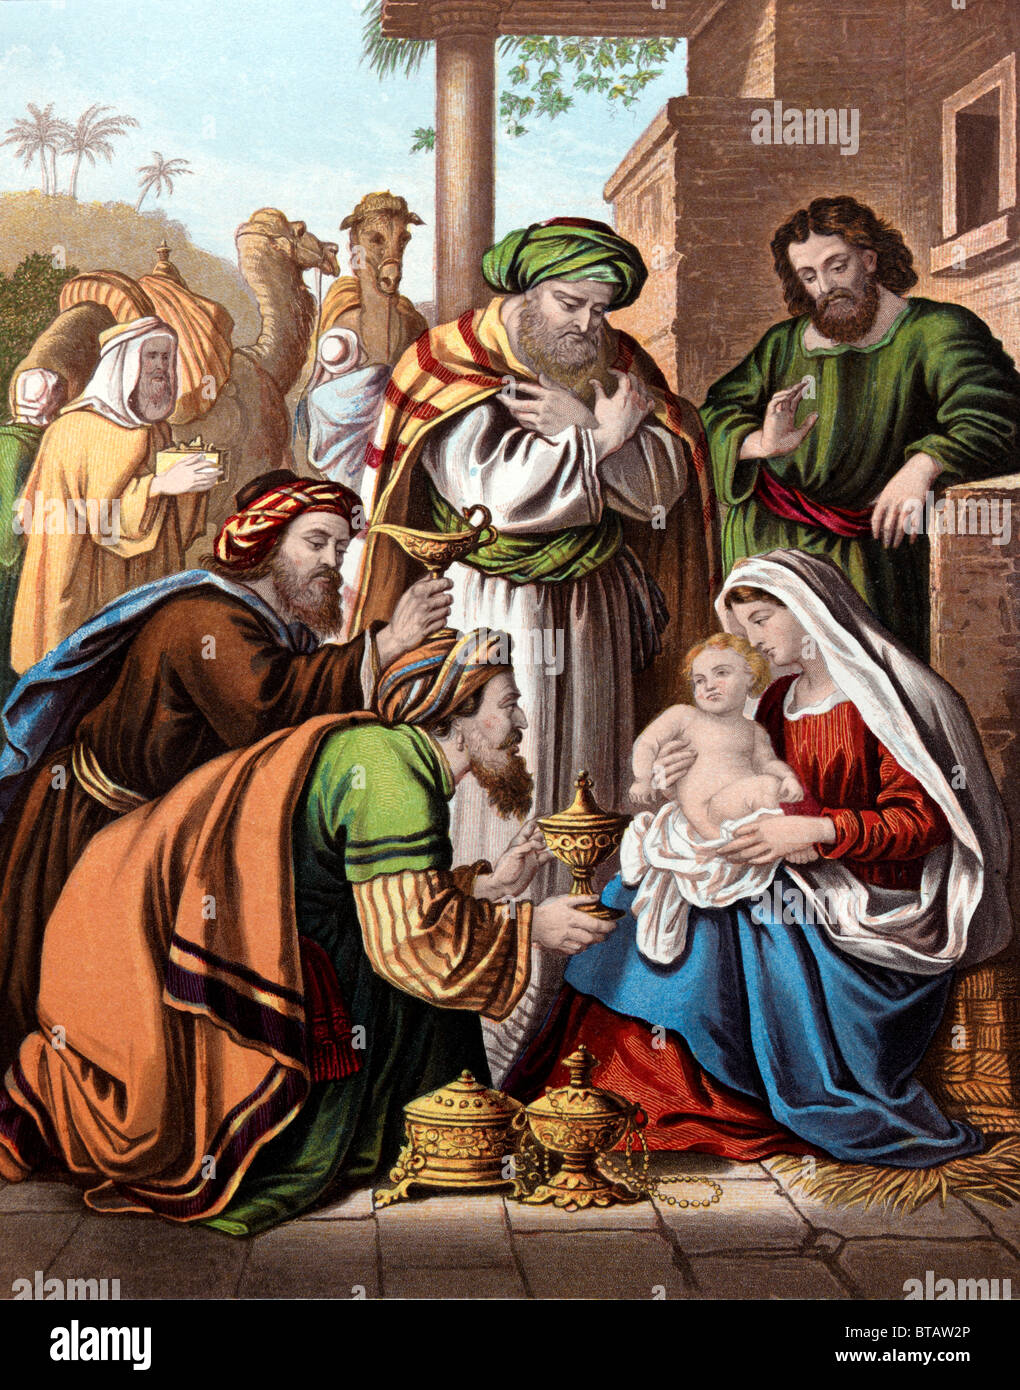 Painting Of The Nativity Three Wise Men Bearing Gifts For Baby Jesus Stock Photo